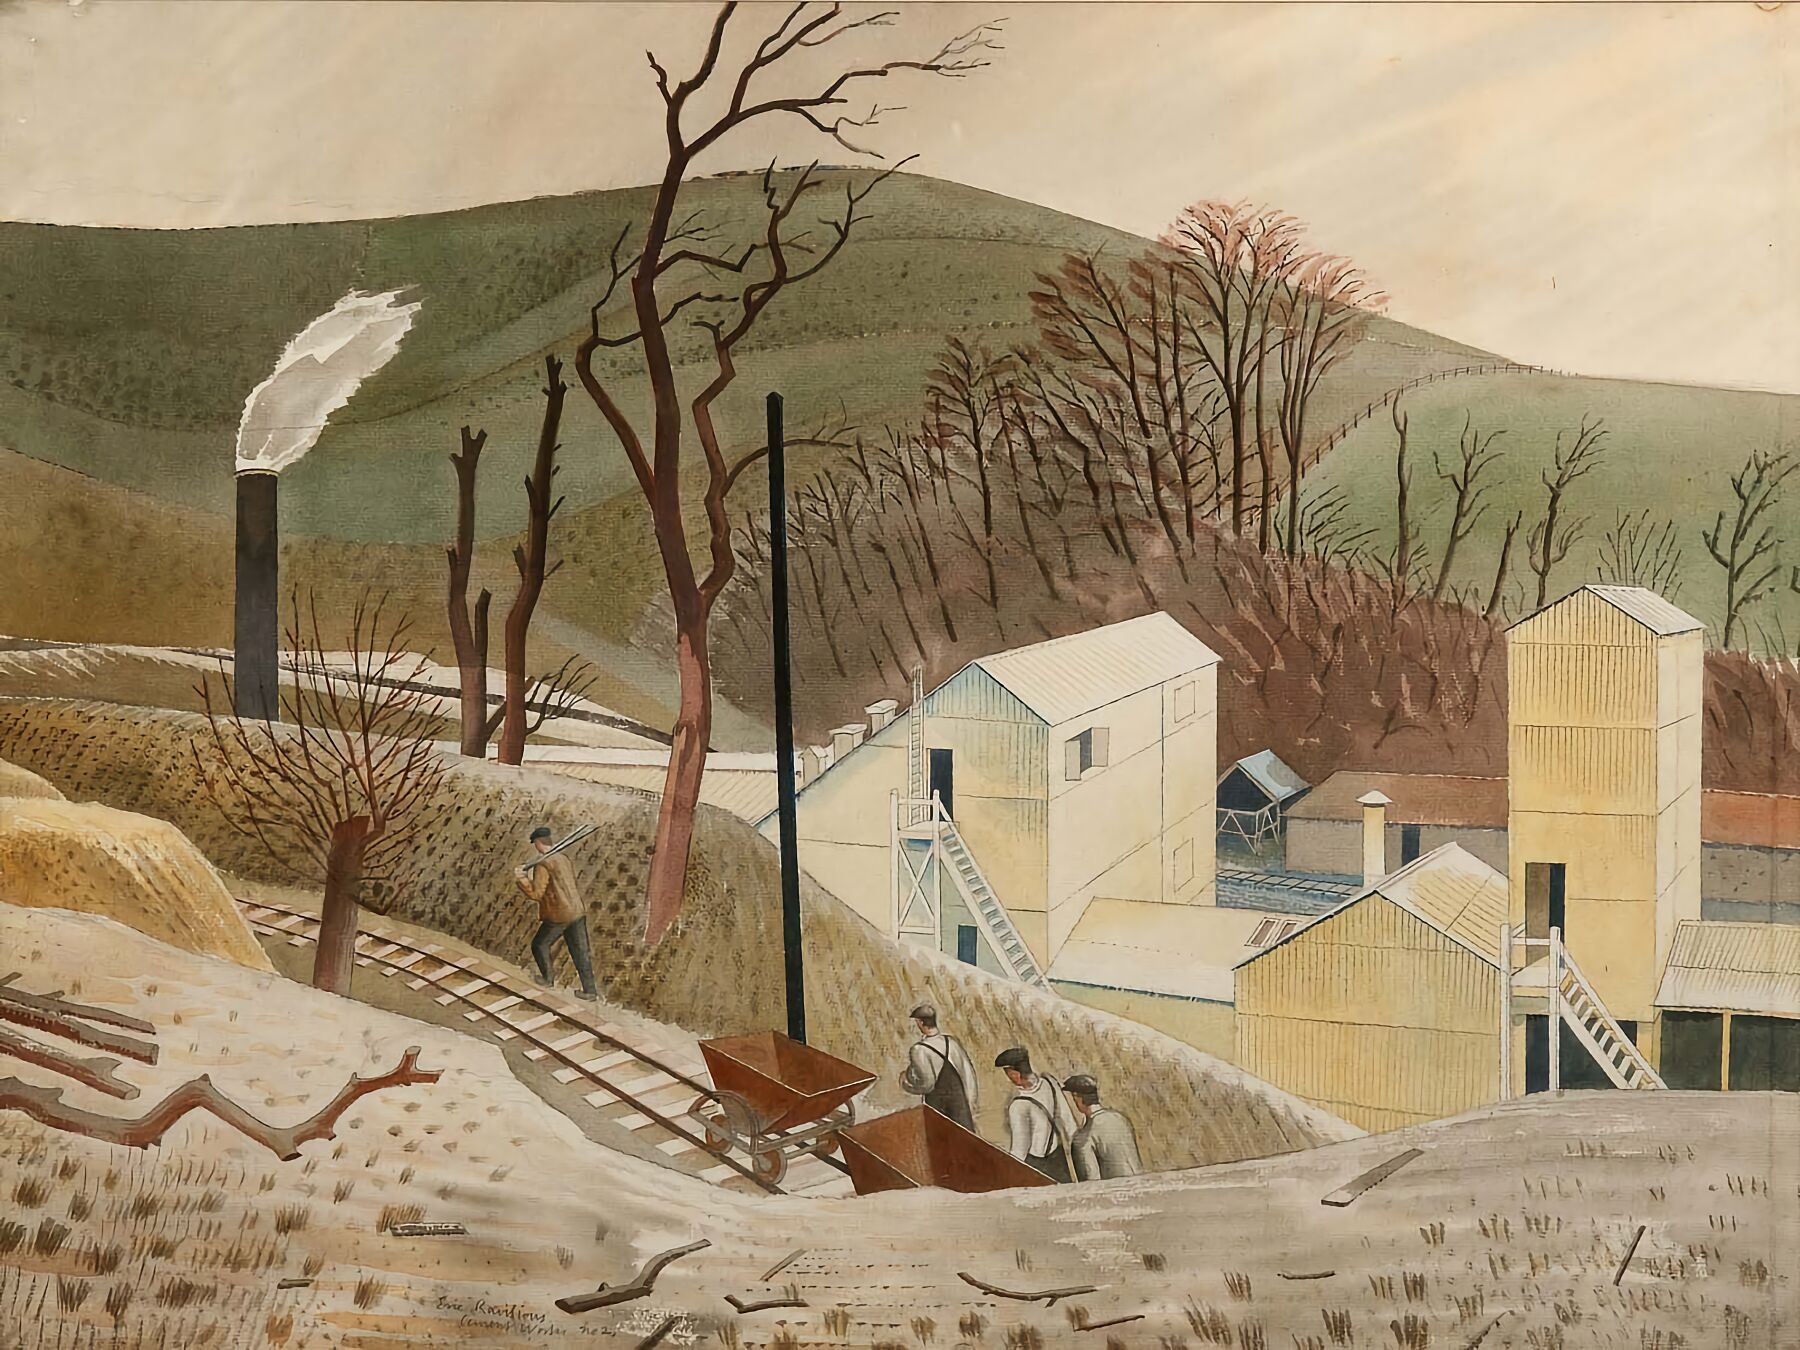 Cement Works No. 2 by Eric Ravilious - 1934